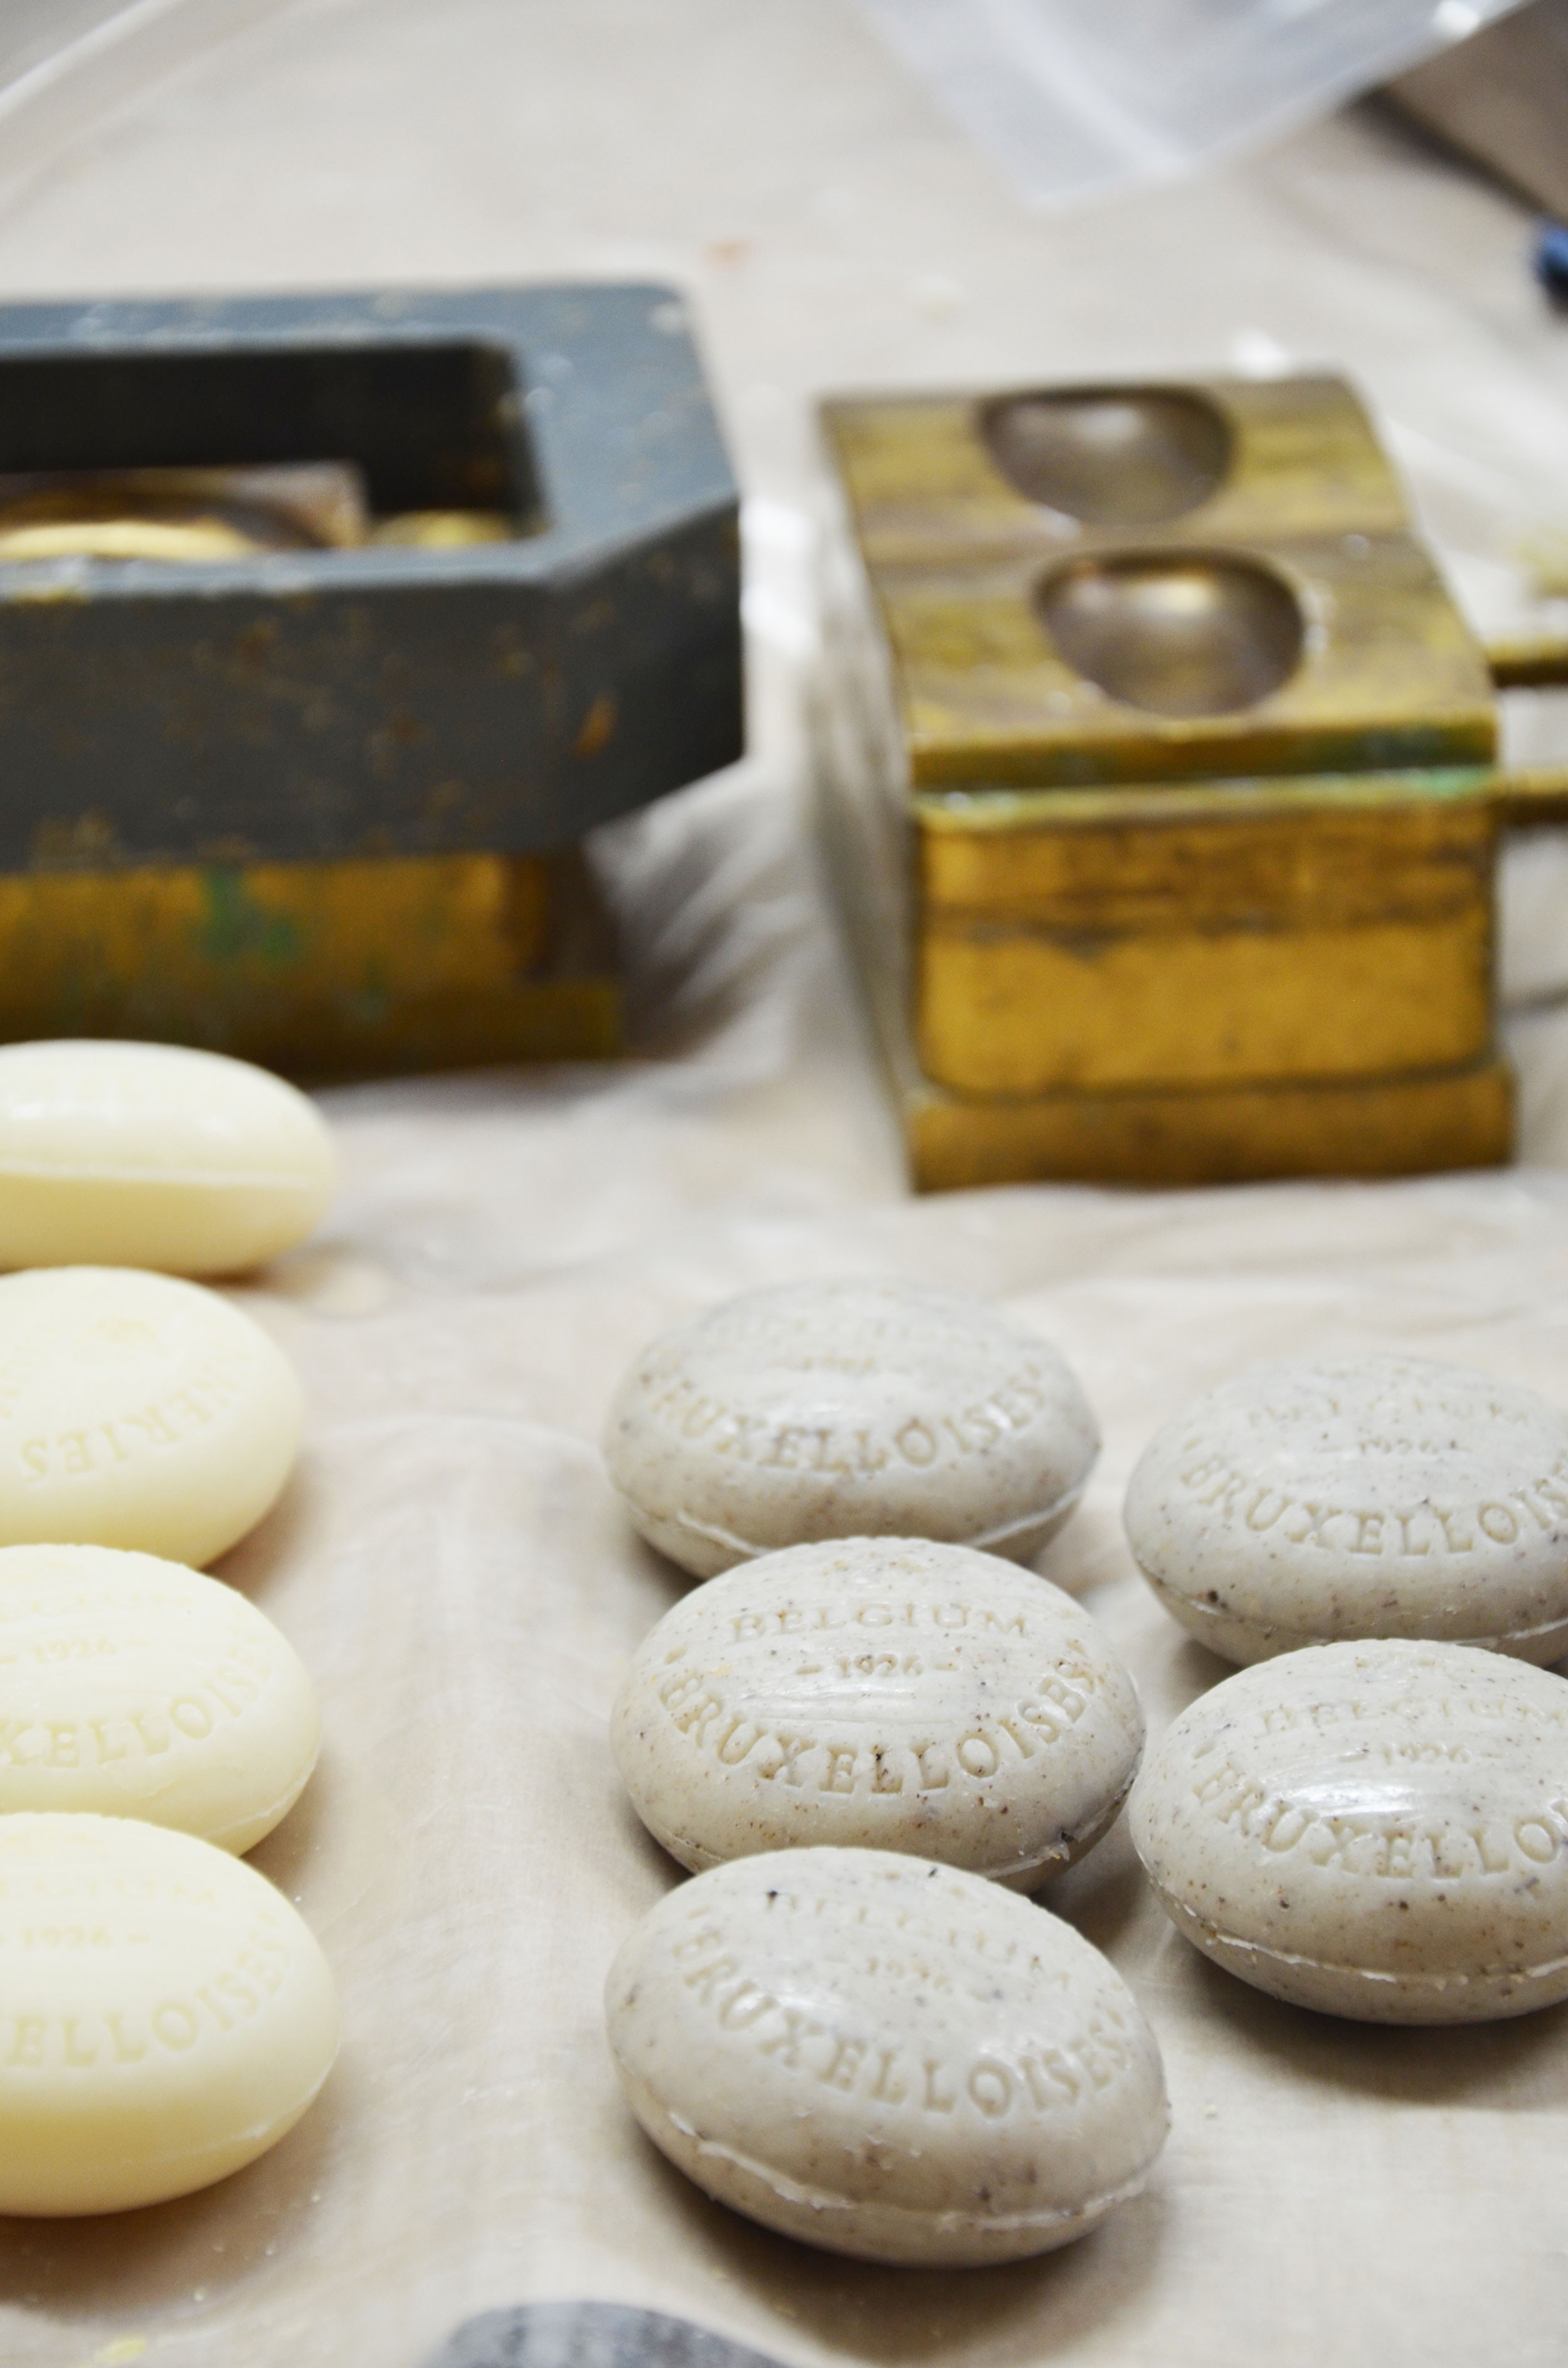 Collection of soaps made with linseed products, collaboration with Savonneries Bruxelloises.